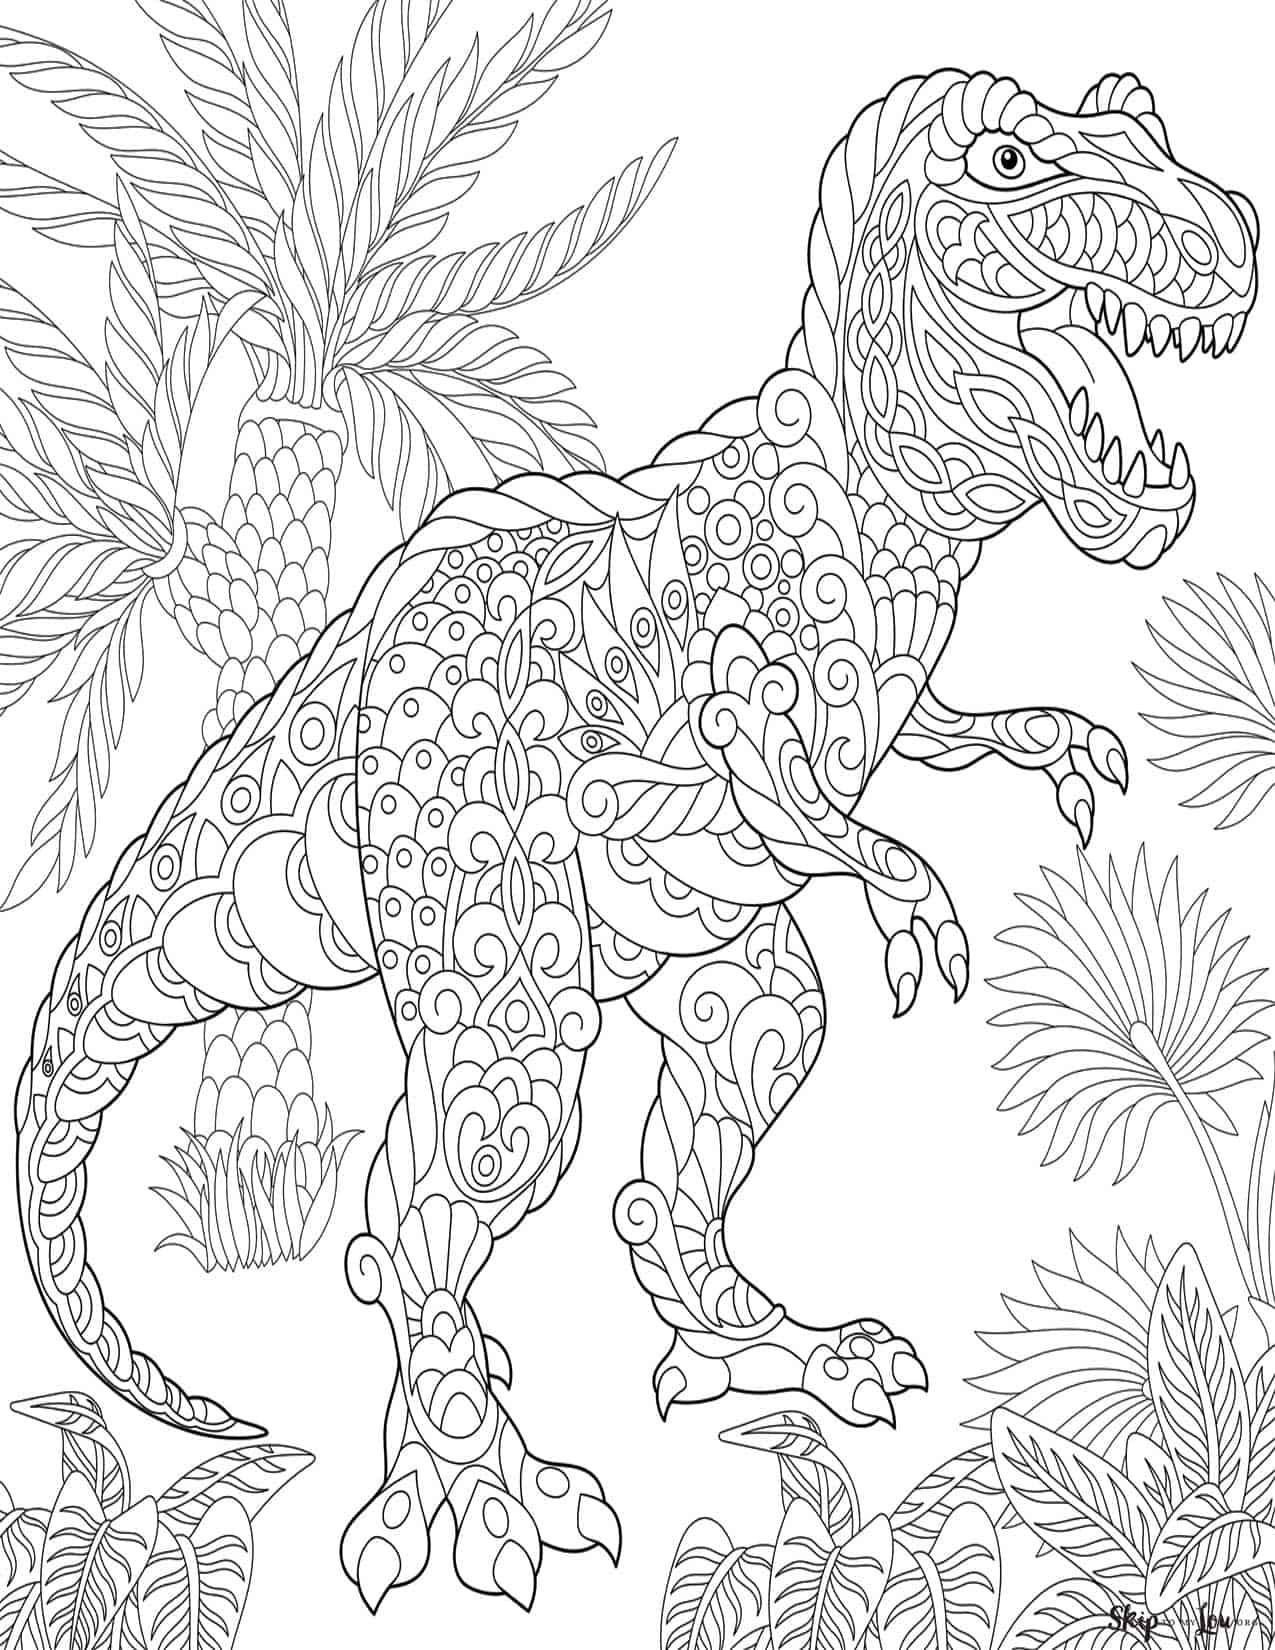 Dinosaur coloring pages free printables skip to my lou